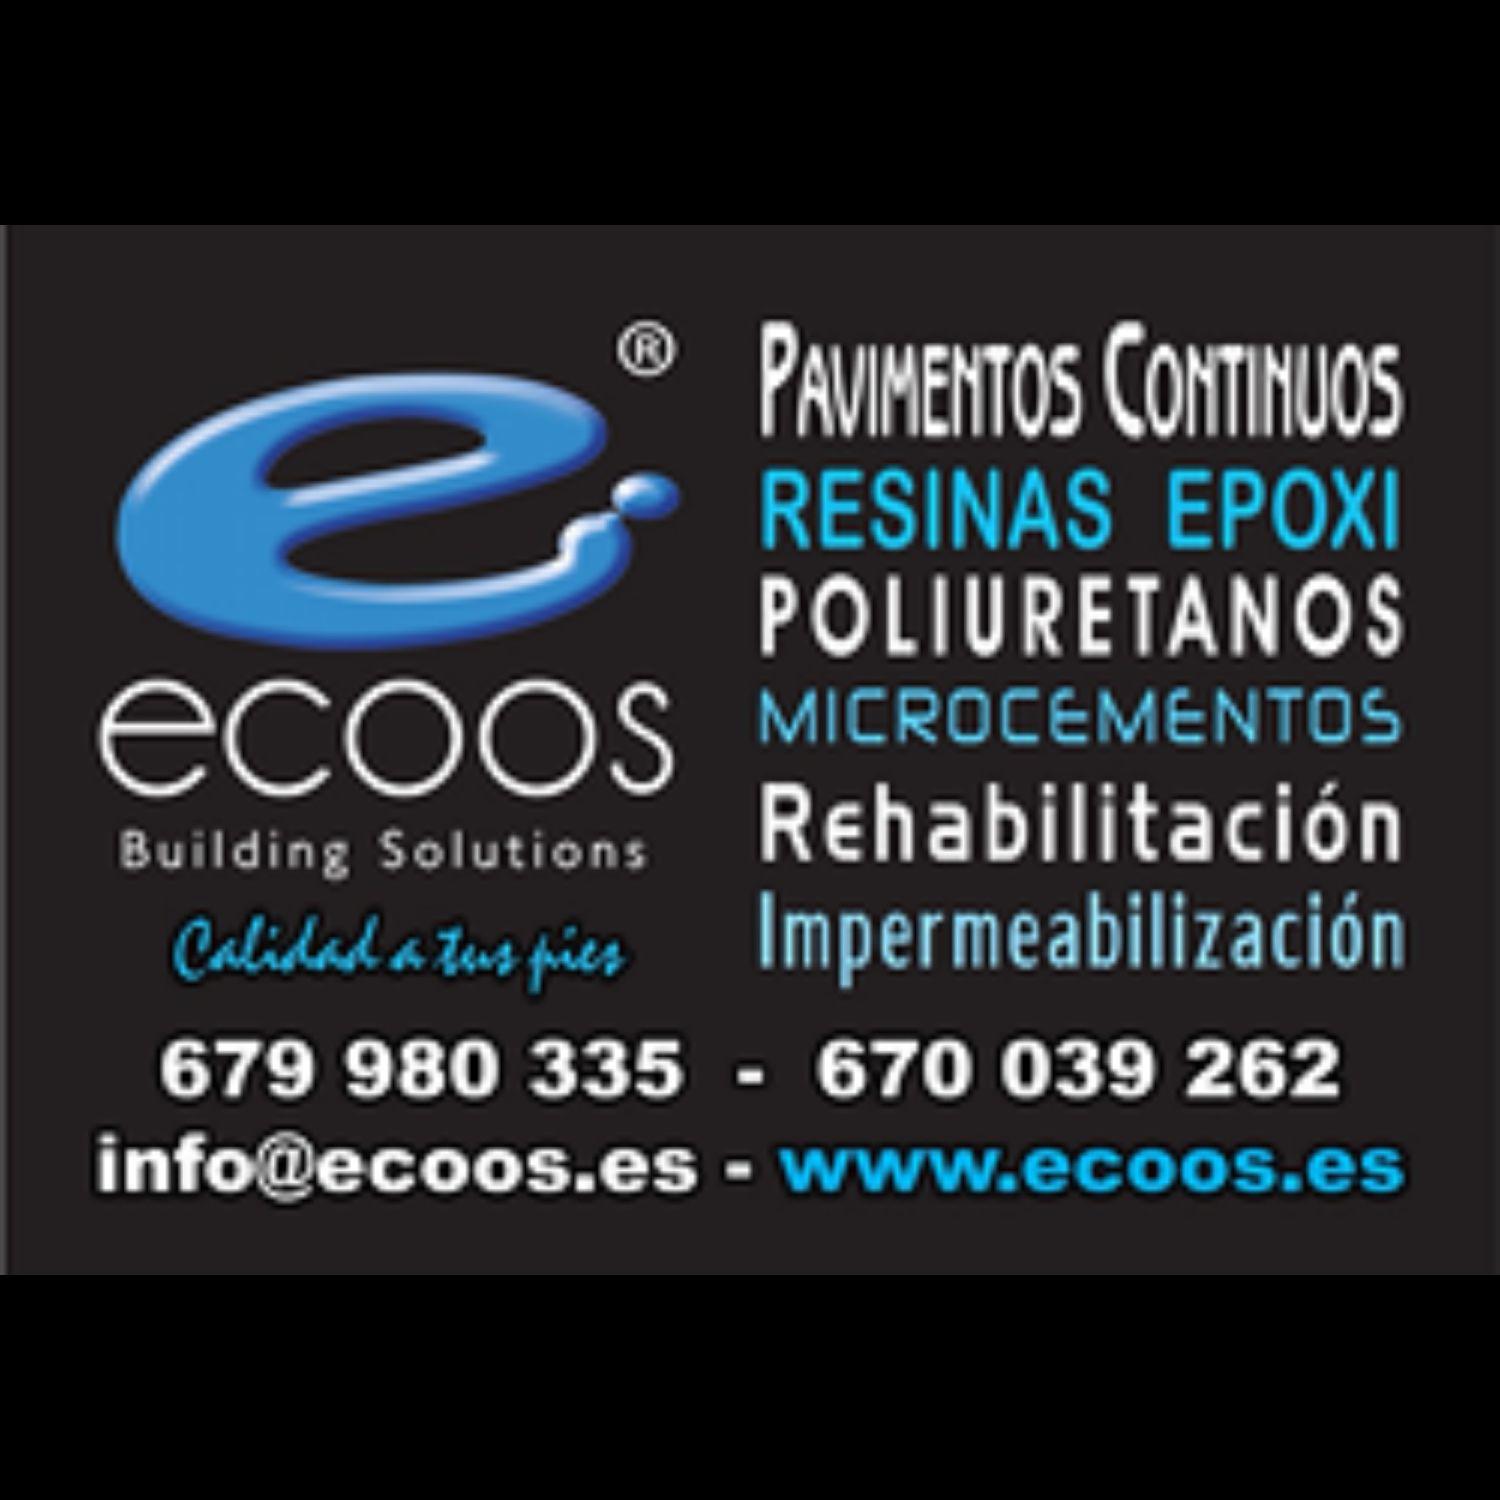 Images ECOOS